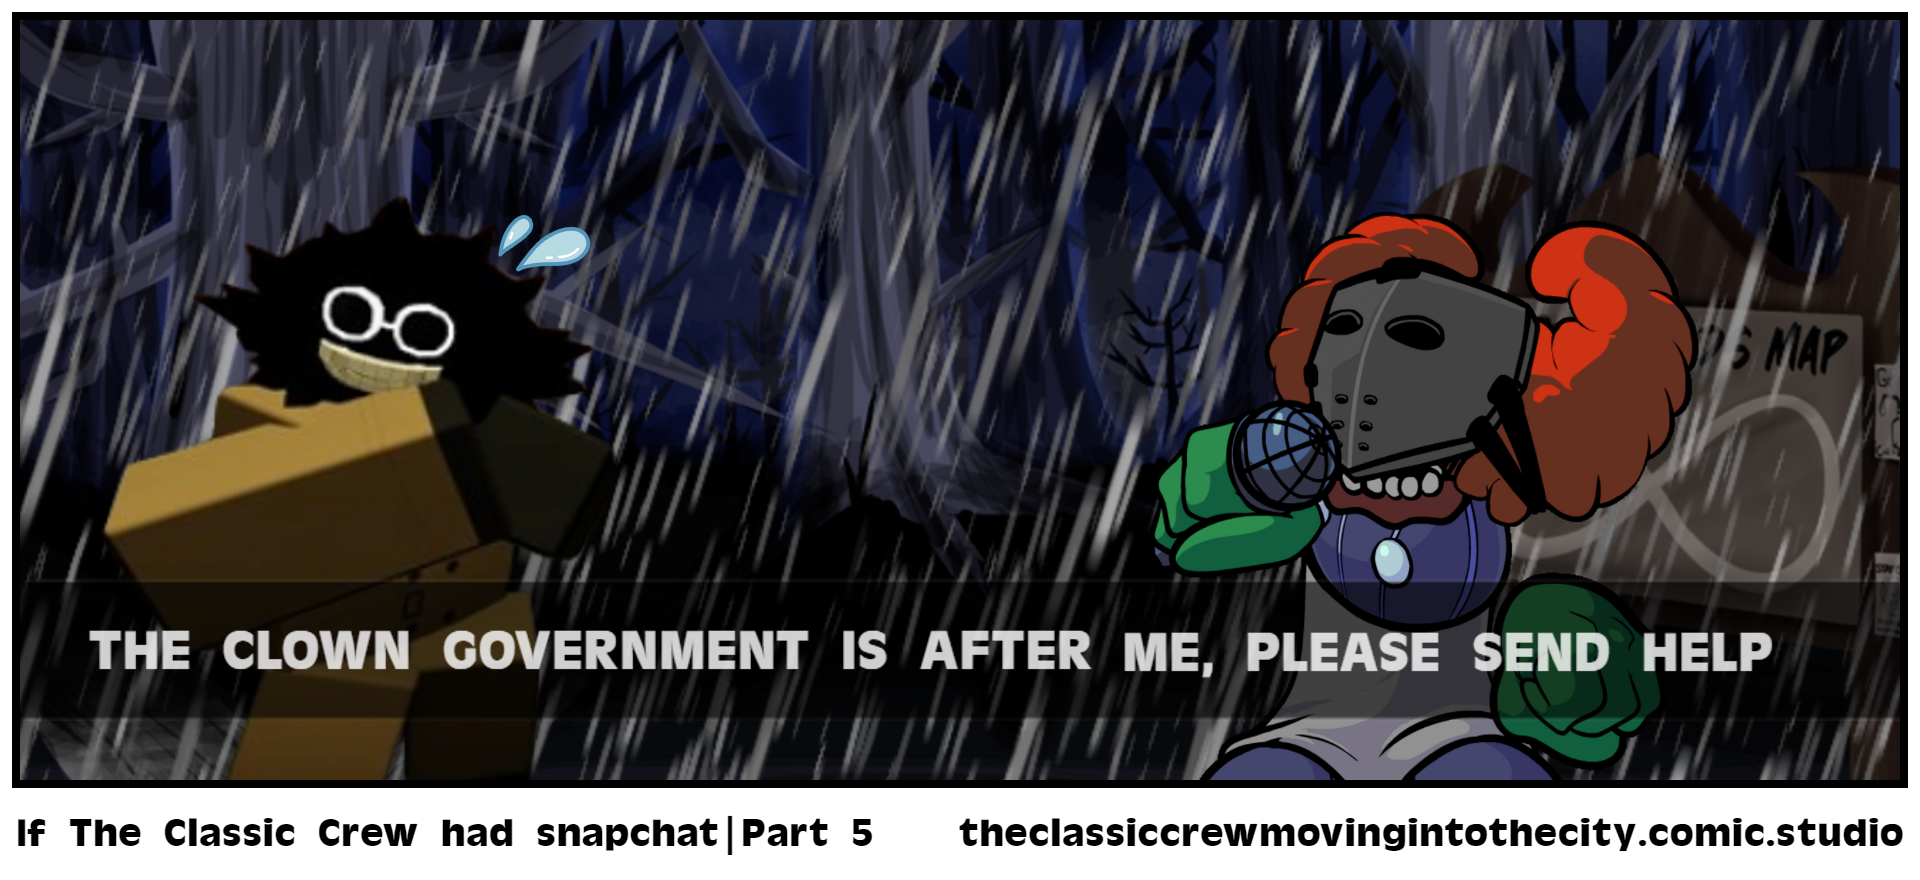 If The Classic Crew had snapchat|Part 5